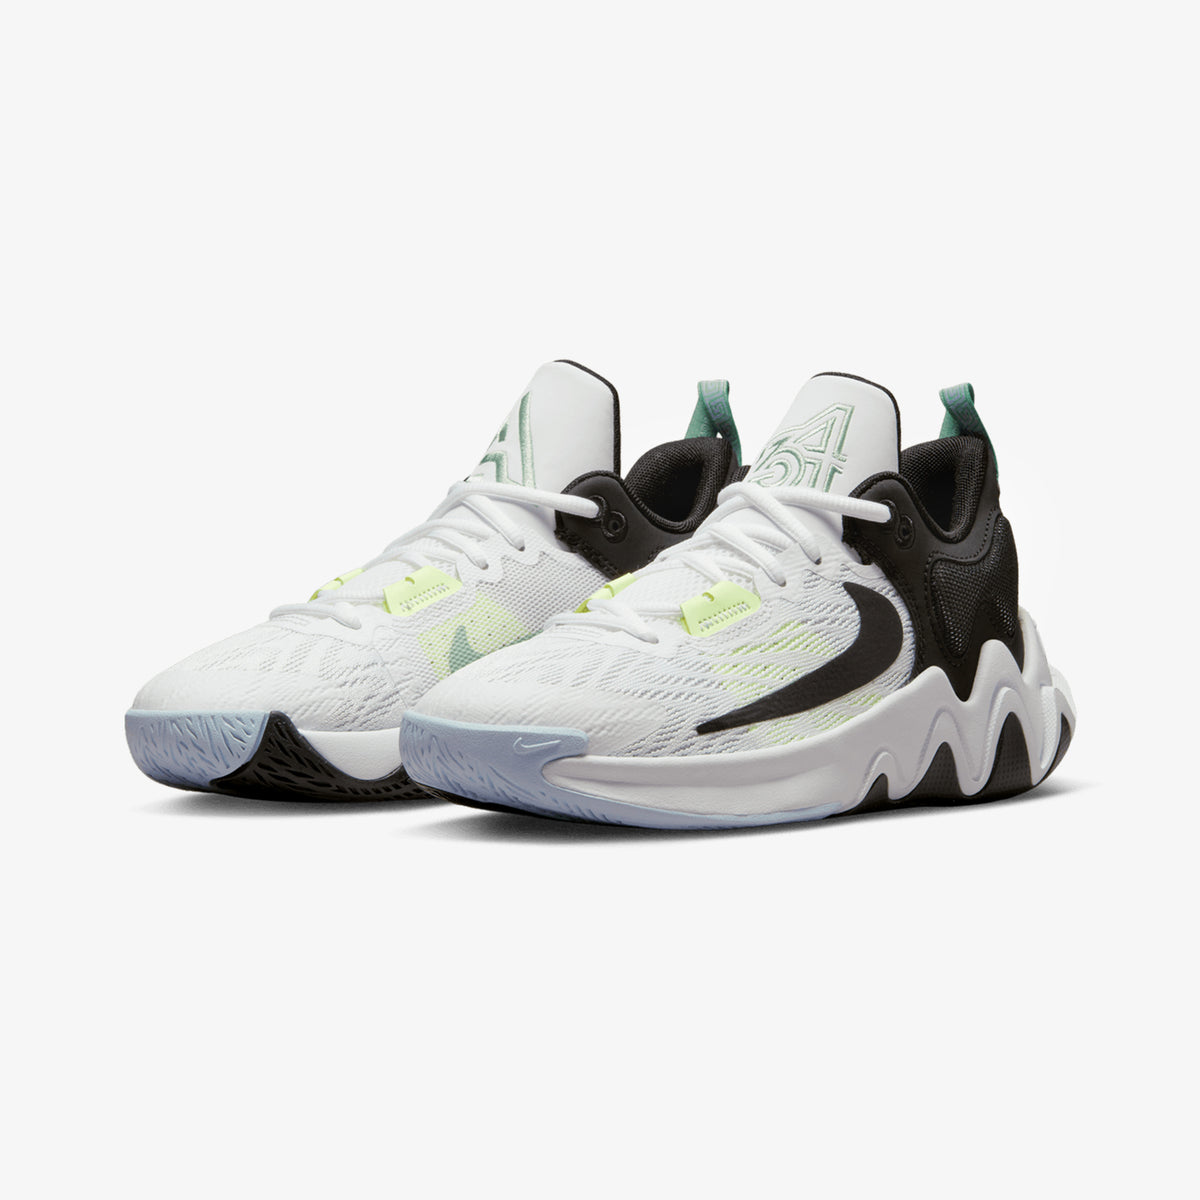 Giannis Immortality 2 (GS) - White/Barely Volt